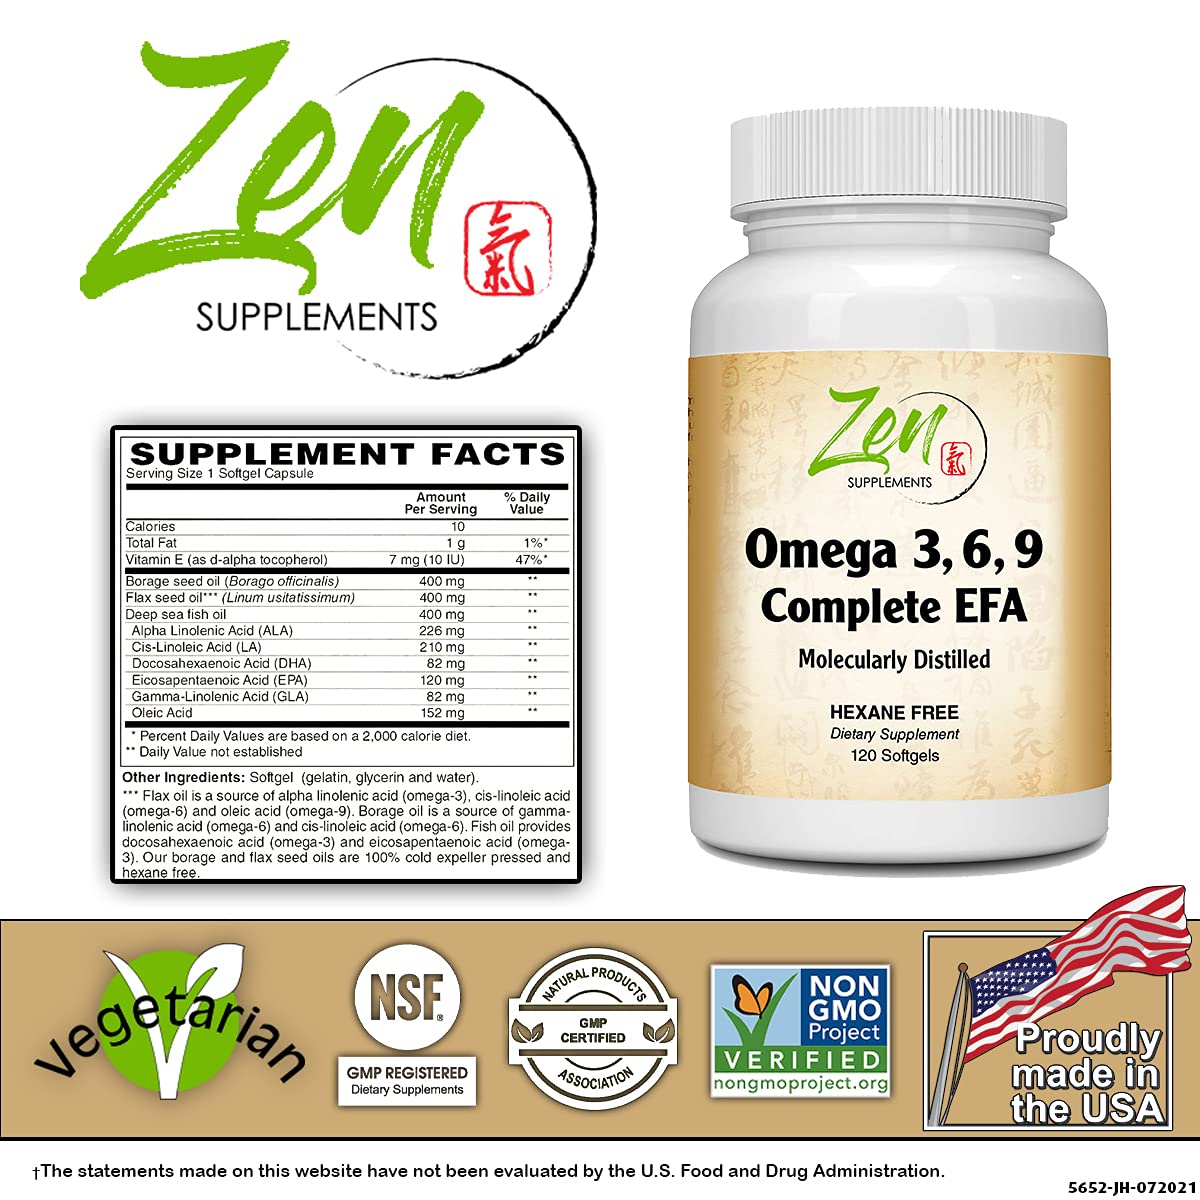 Zen Supplements - Omega Omega 3-6-9 - Sourced from Deep Sea Fish, Flax Seed & Borage Oils. Purified with Molecular Distillation - Supports Heart and Circulatory Health 120-Softgel